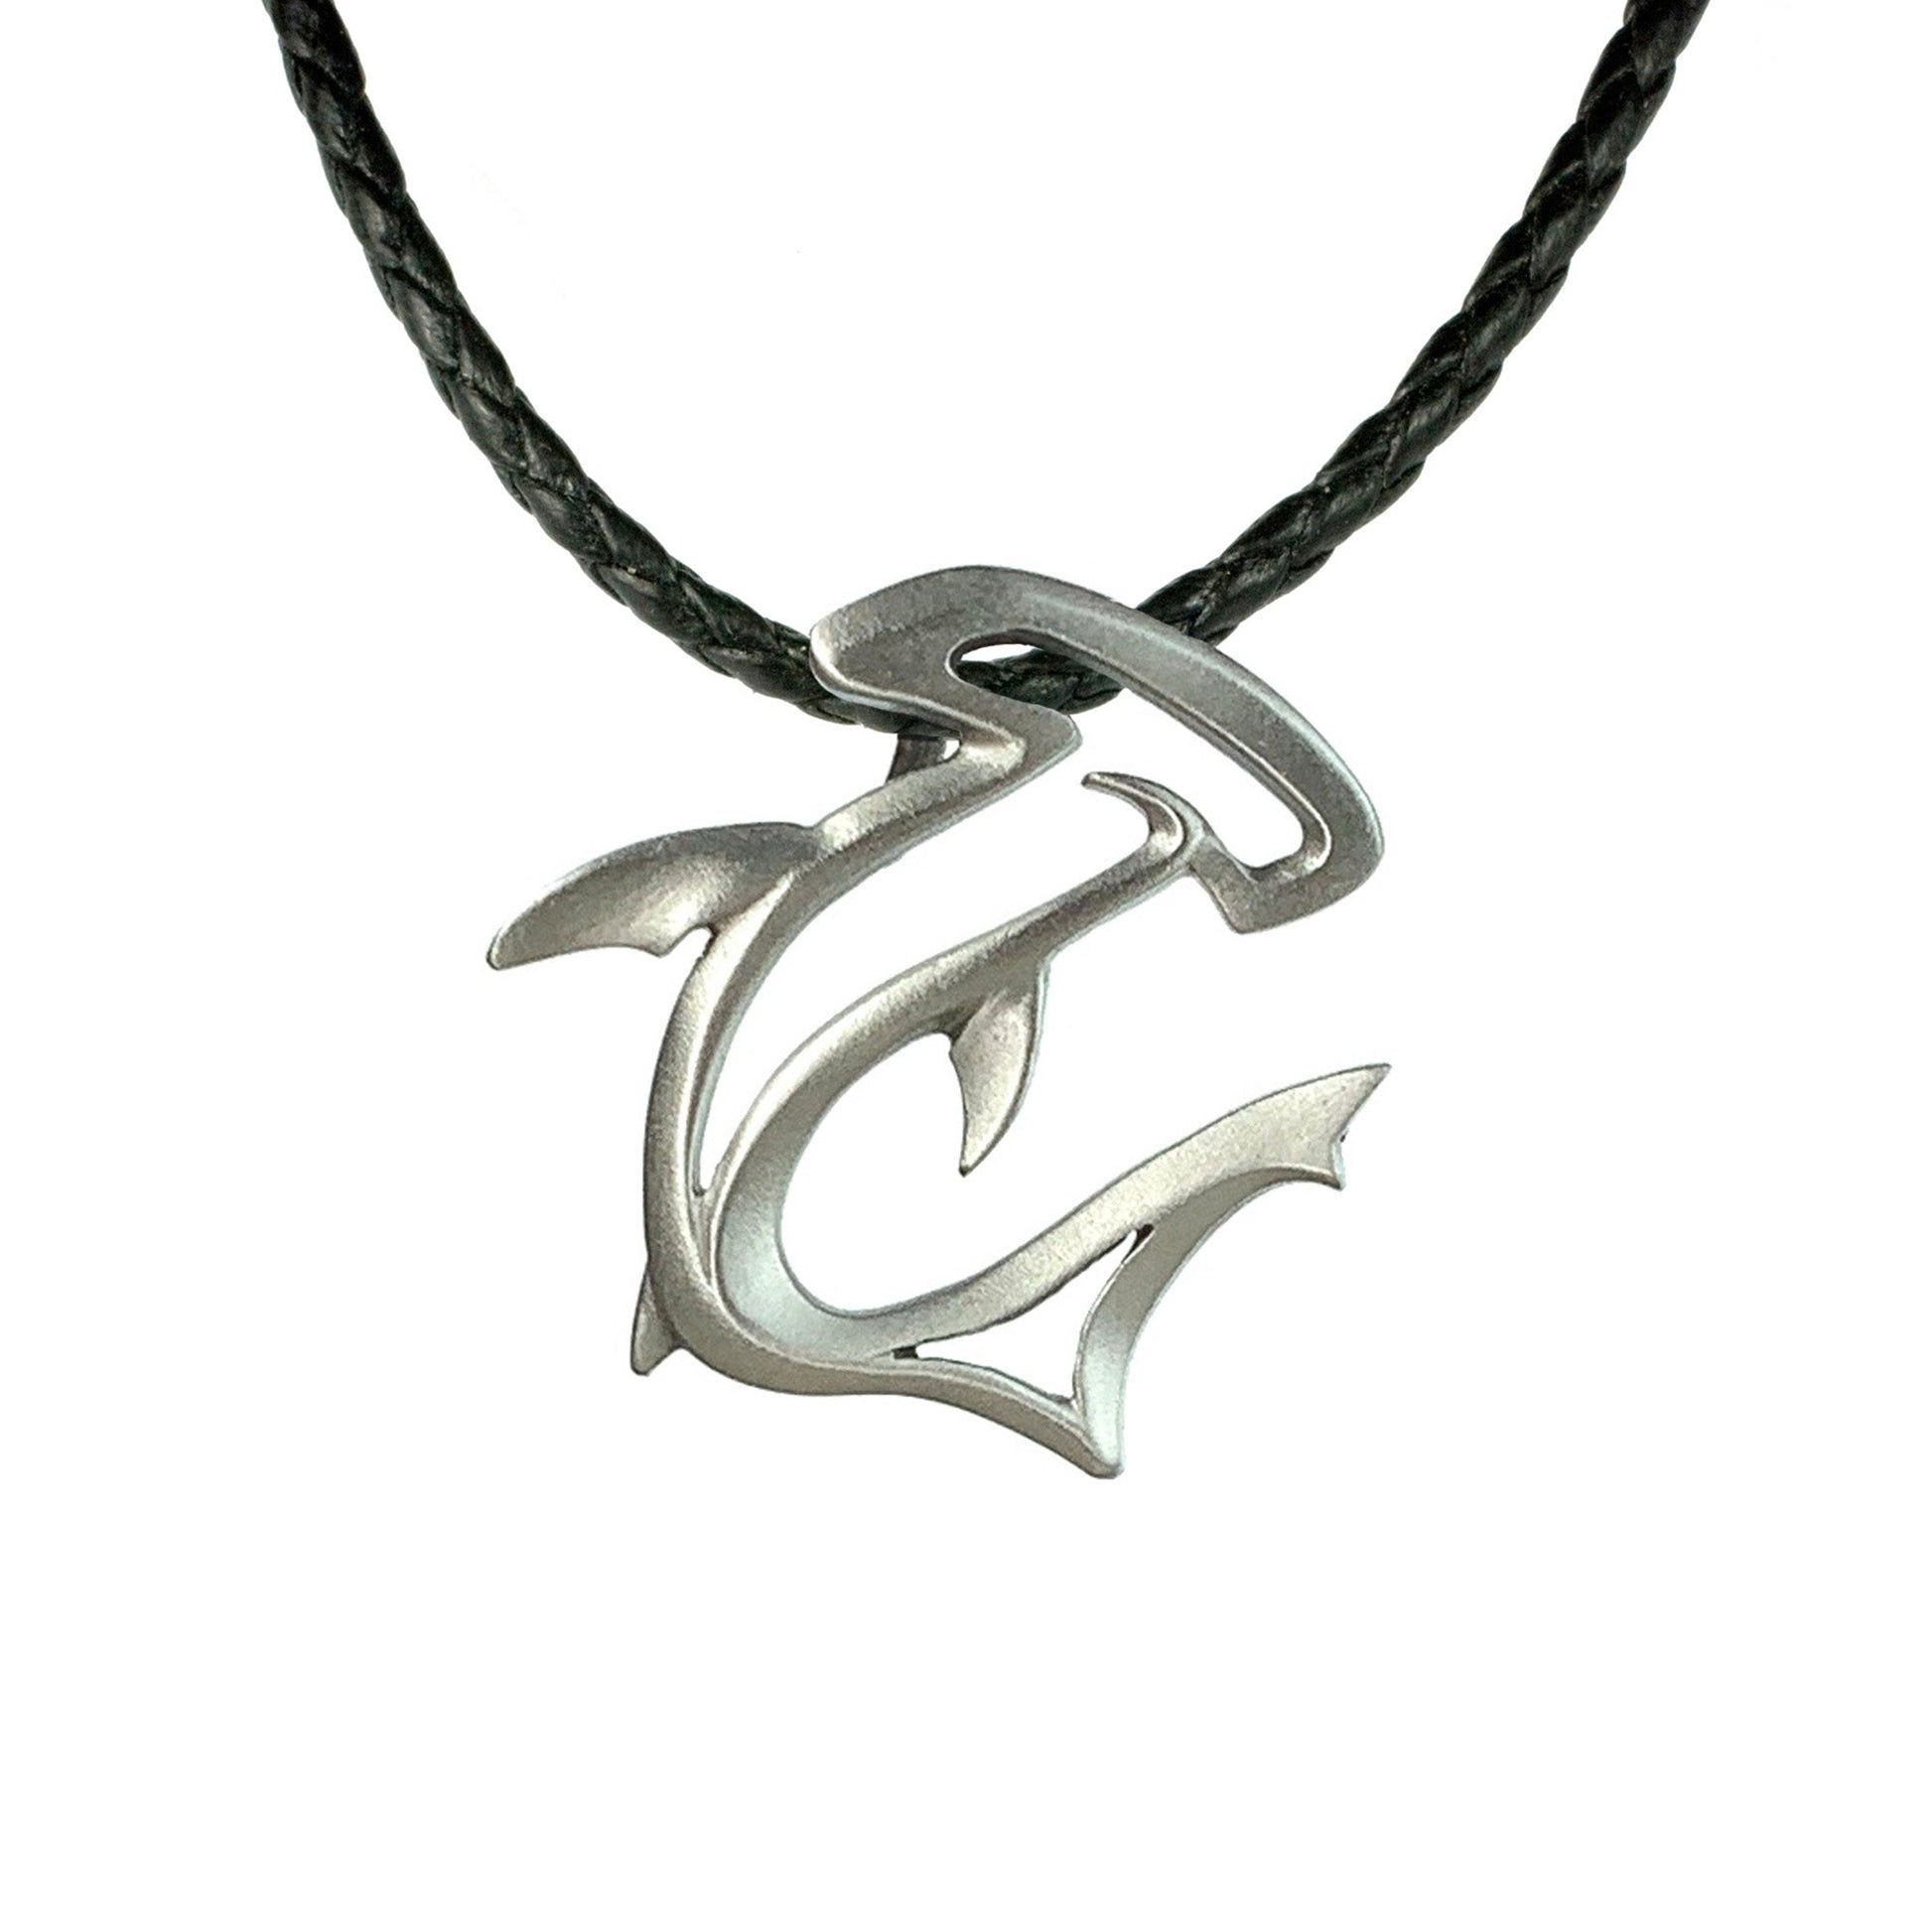 Hammerhead Shark Necklace- Shark Gifts for Women and Men, Hammerhead Shark Necklace, Gifts for Shark Lovers, Sea Life Jewelry, Shark Charm - The Tool Store